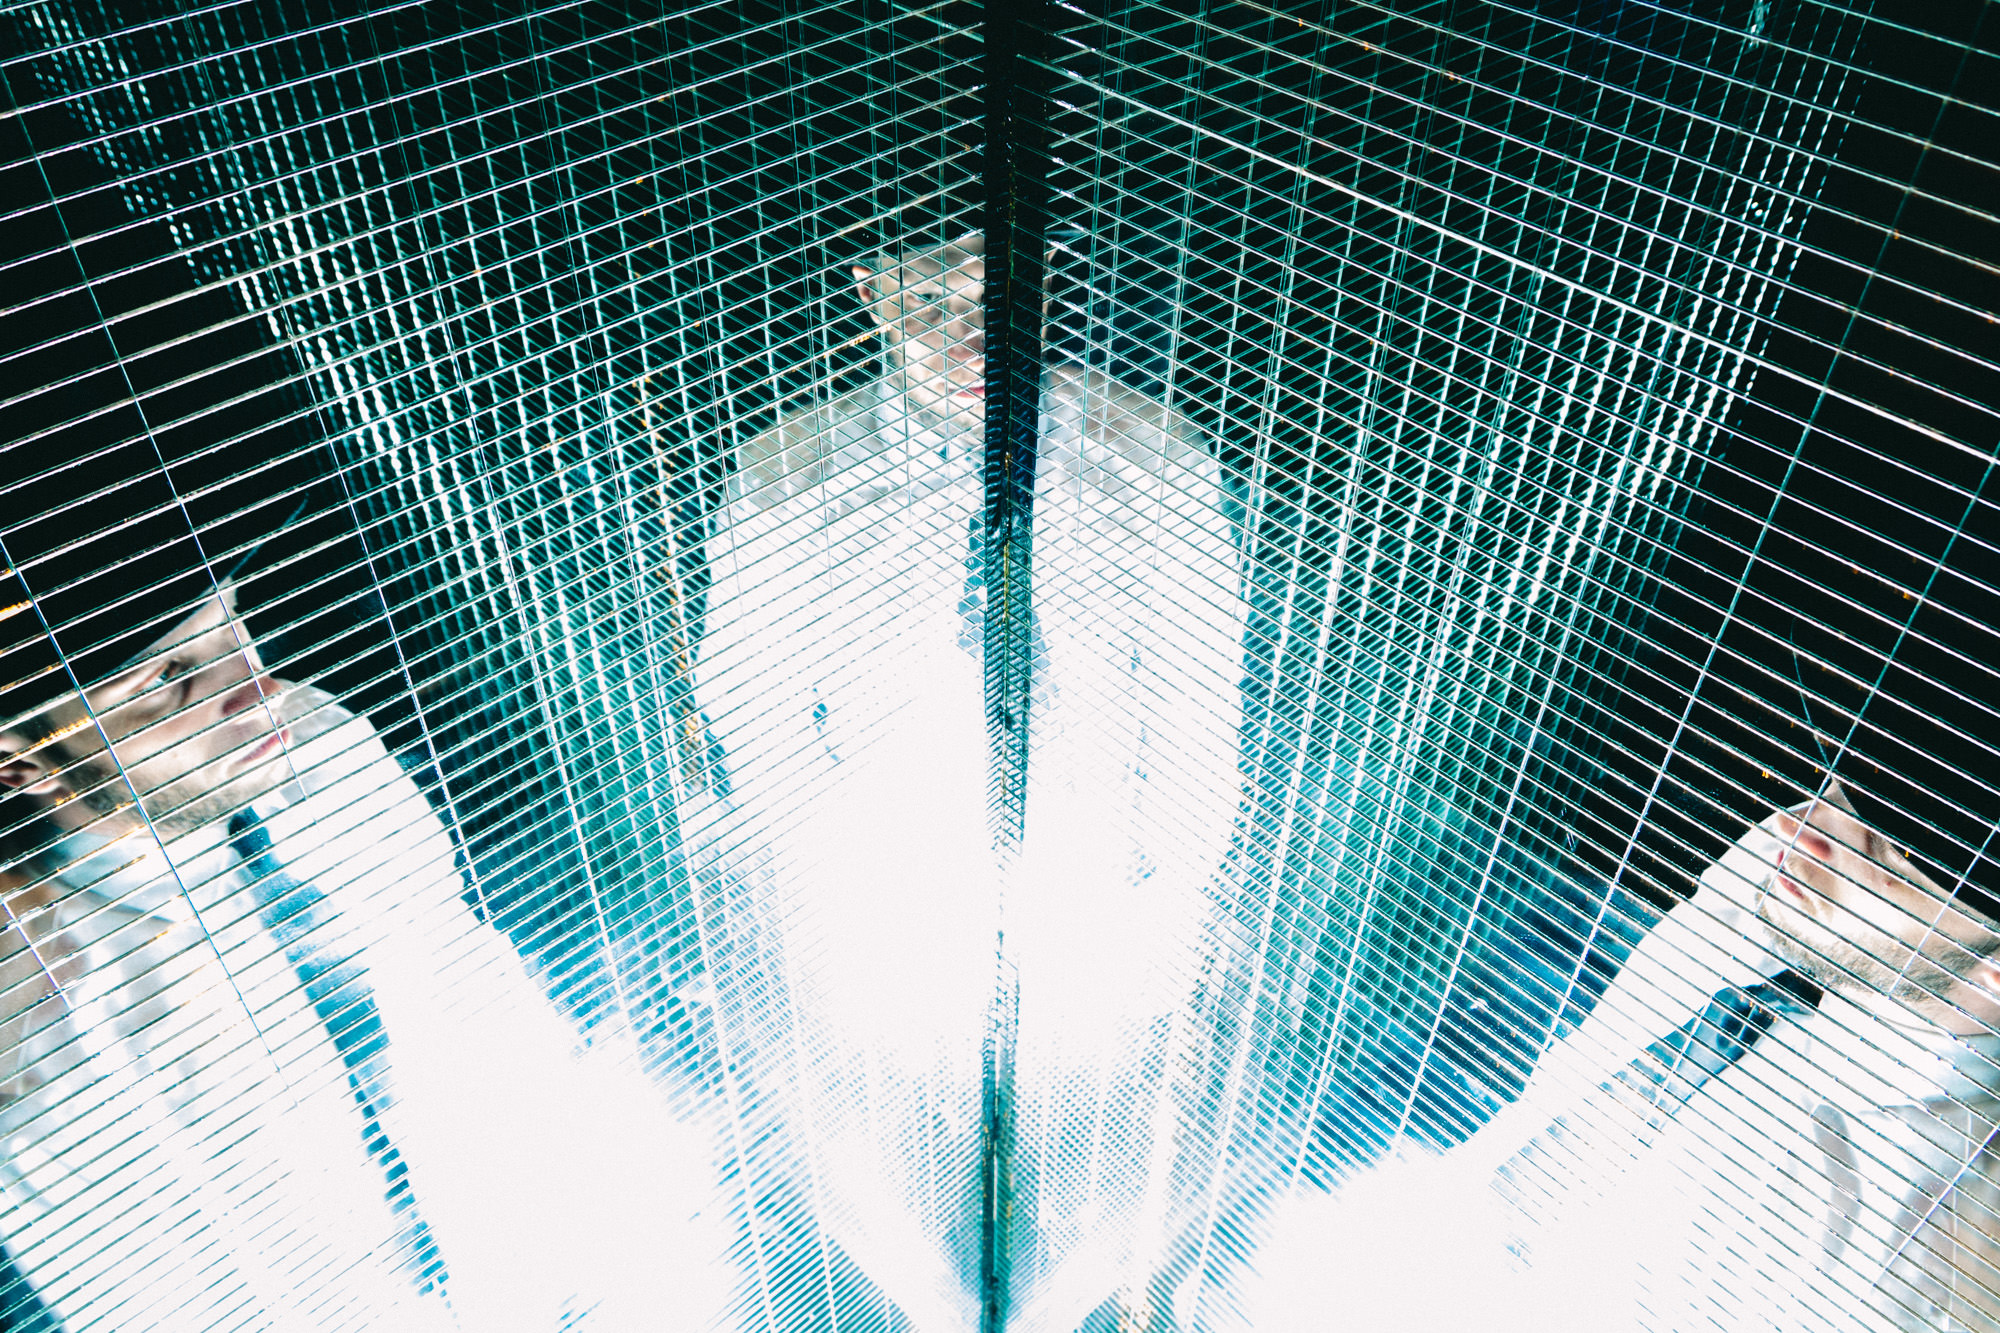 Trapped in a prism, in a prism of light. (125 of 365)